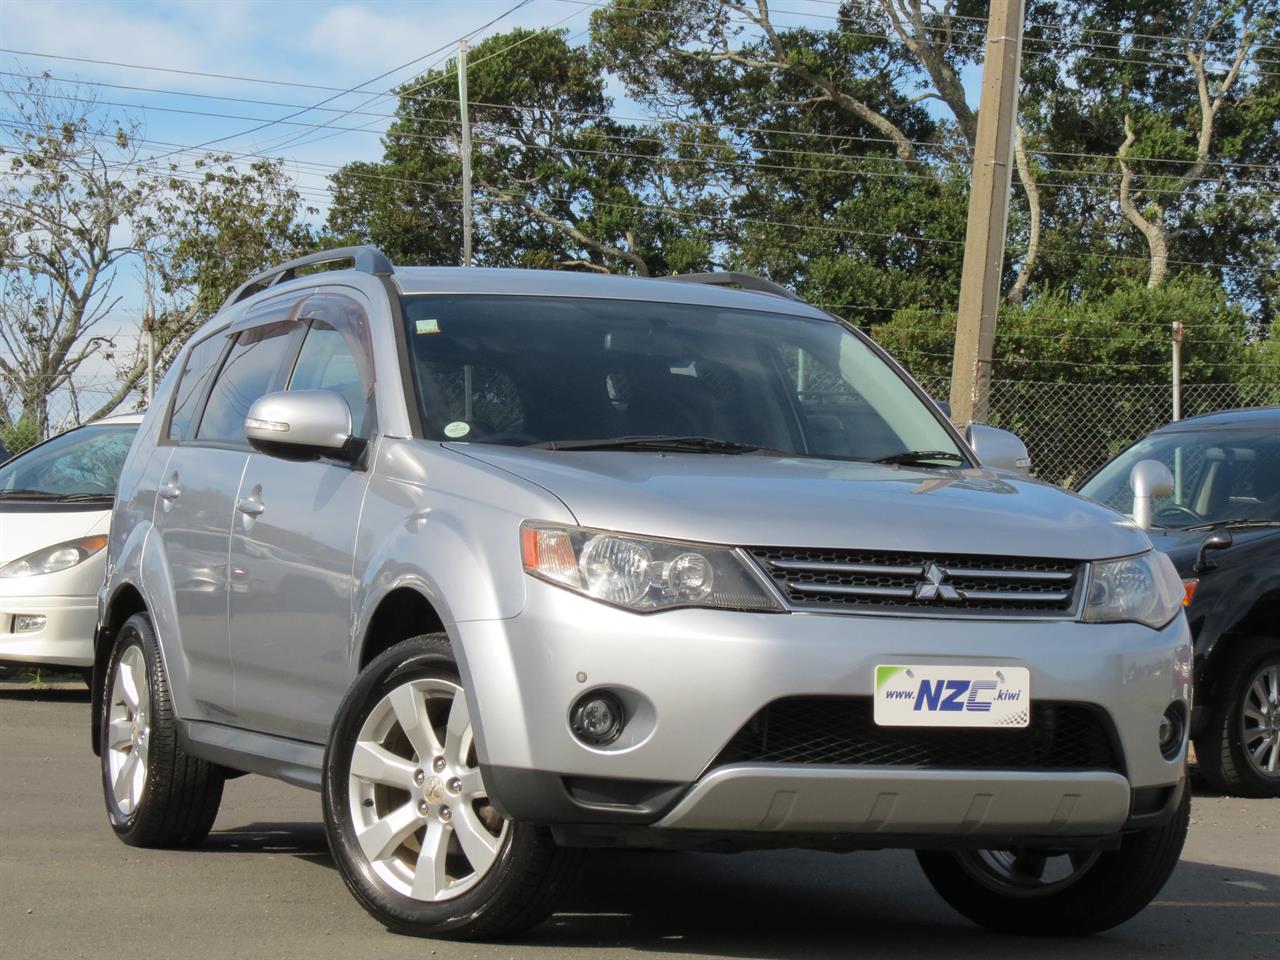 NZC 2009 Mitsubishi Outlander just arrived to Auckland